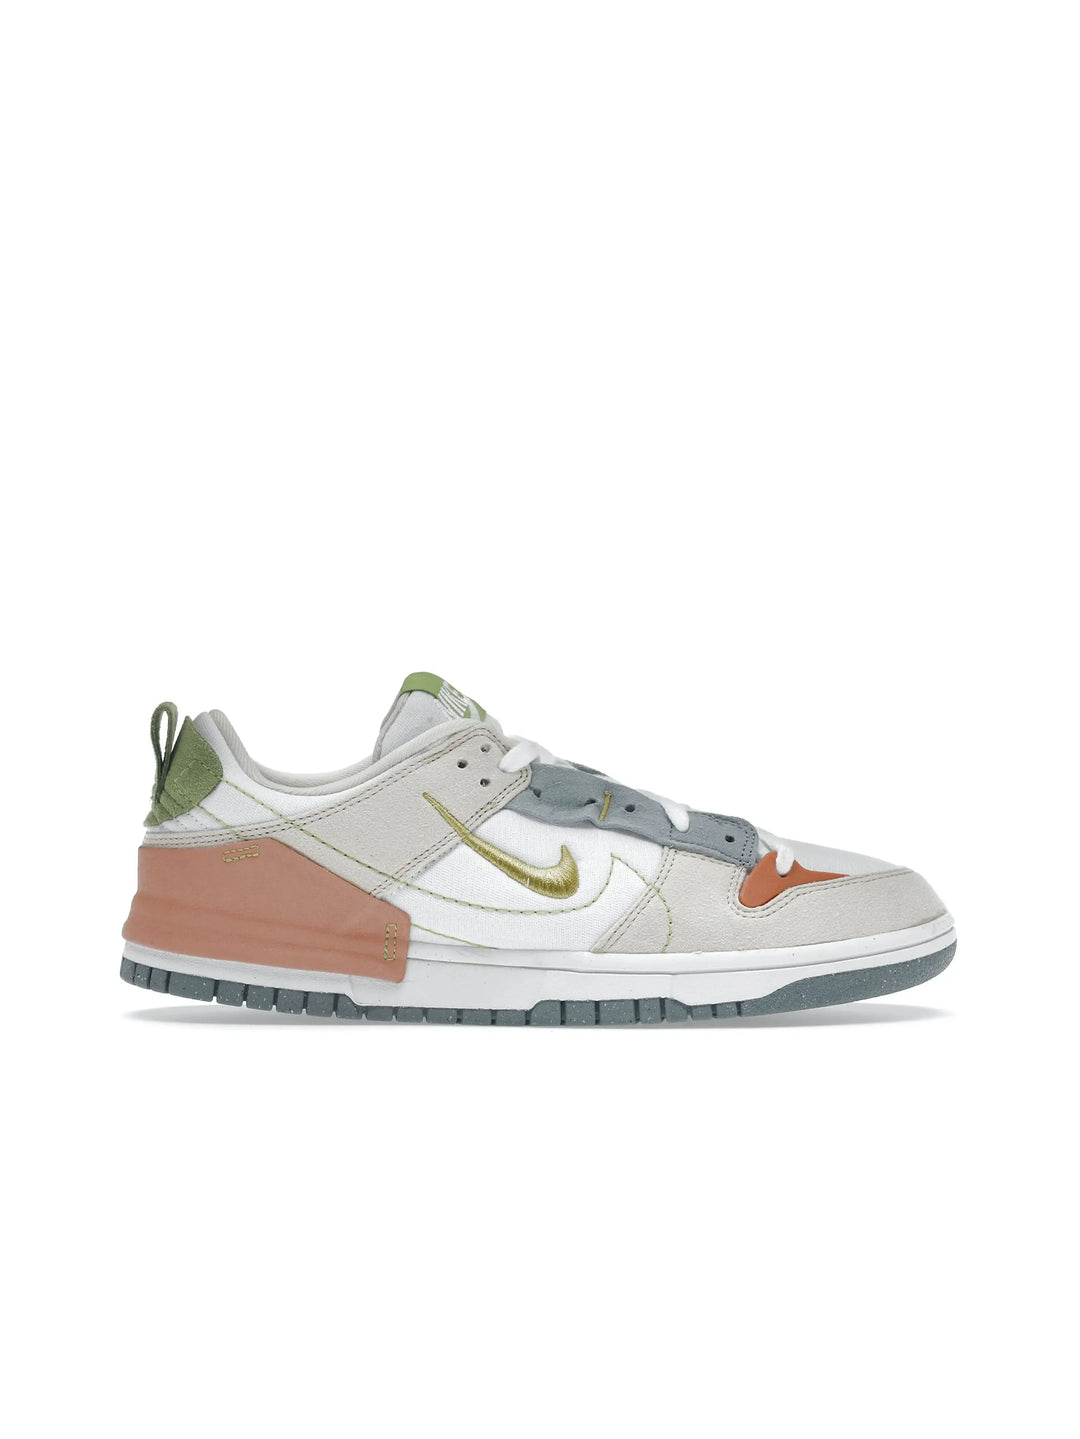 Nike Dunk Low Disrupt 2 Easter Pastel (W) in Auckland, New Zealand - Shop name